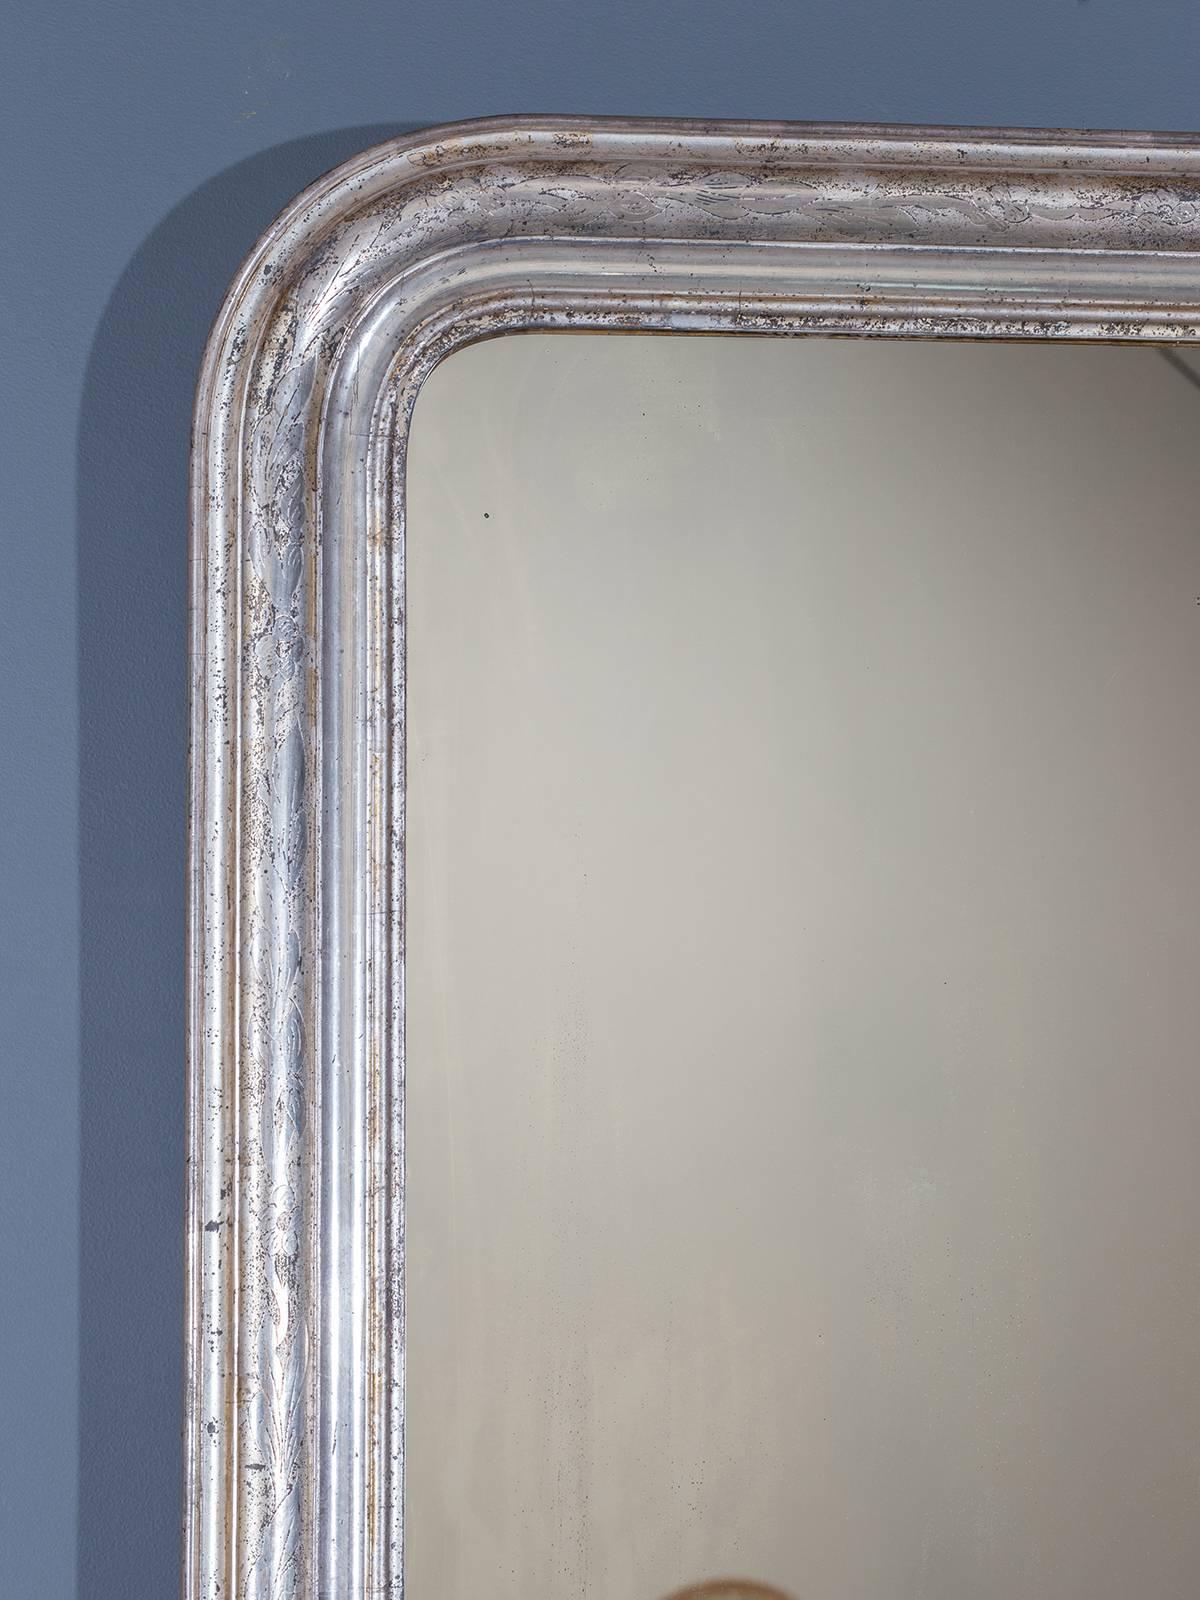 Receive our new selections direct from 1stdibs by email each week. Please click Follow Dealer below and see them first!

The elegant simplicity of this antique Louis Philippe mirror circa 1895 is at home in all manner of interiors. The gently